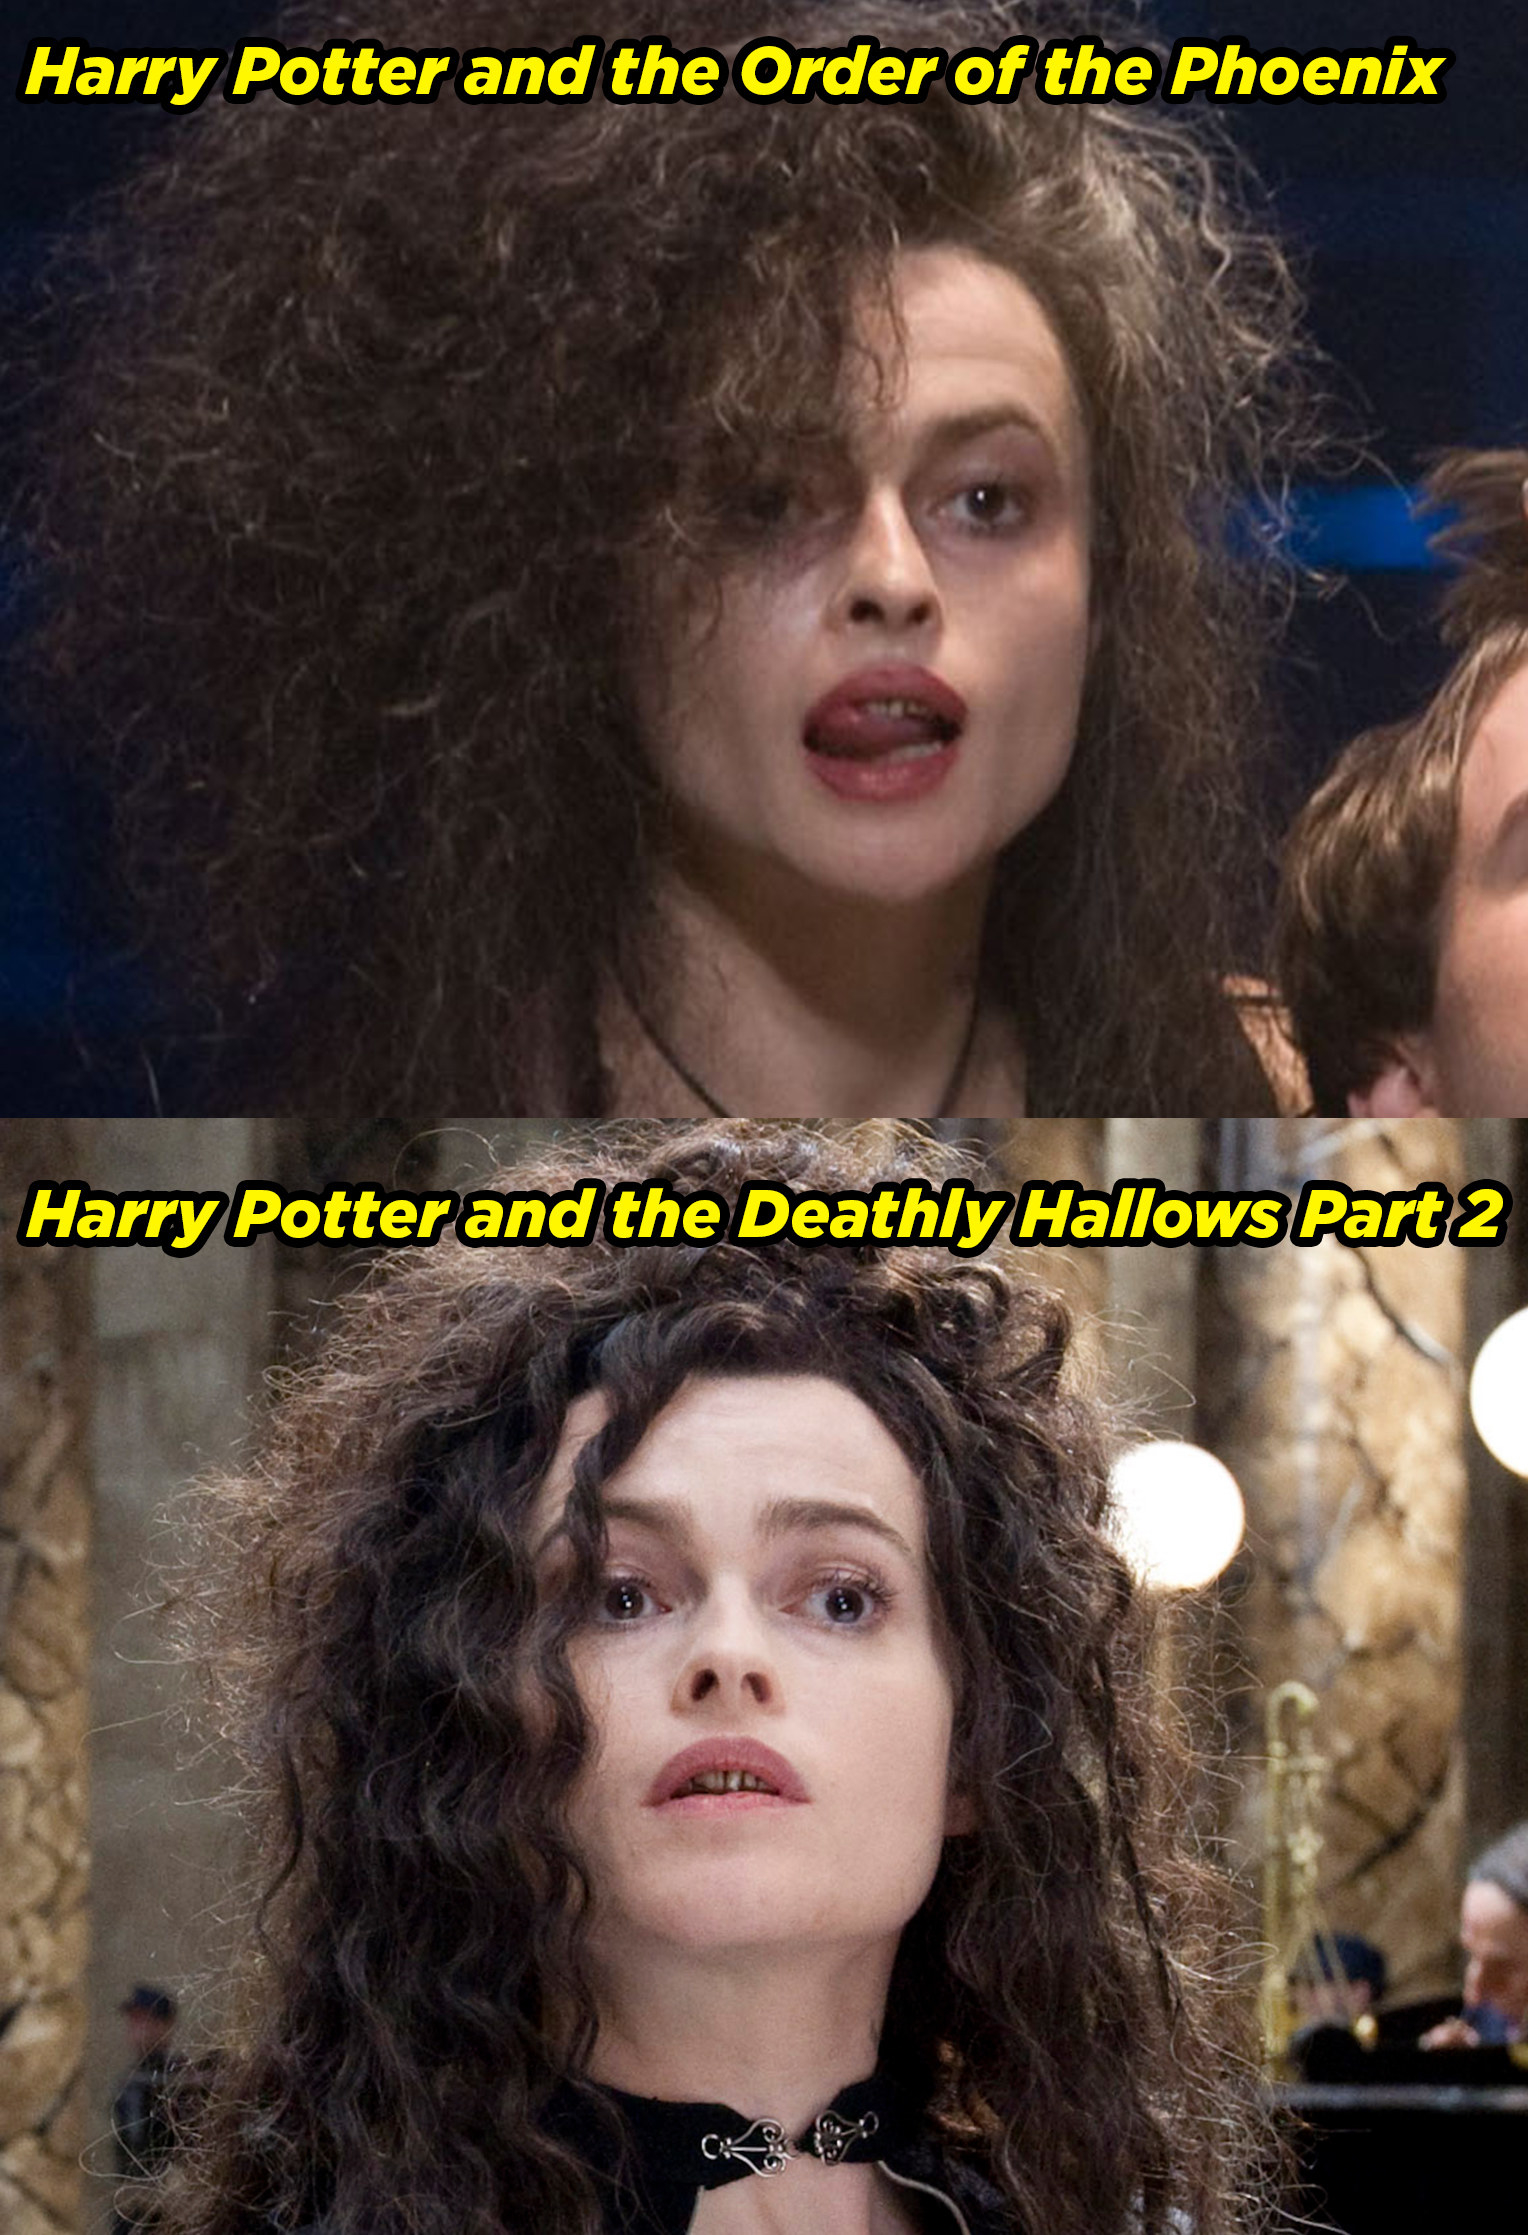 Helena Bonham Carter in Order of the Phoenix and Deathly Hallows Part 2